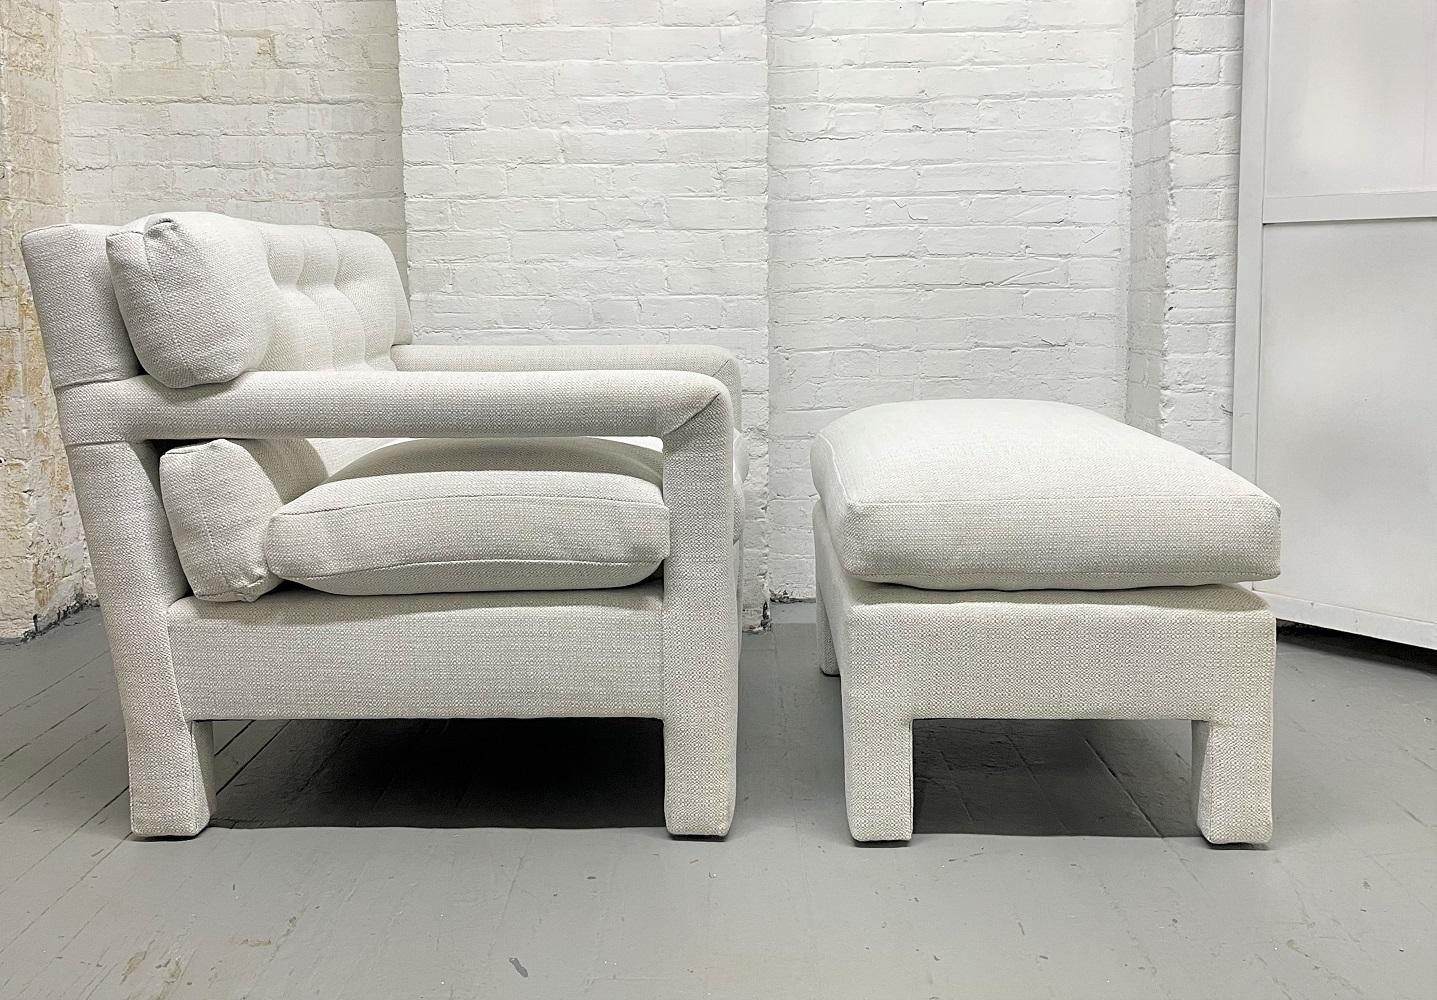 Milo Baughman style Parsons lounge chair and matching ottoman. Tufted back and newly upholstered. Mid-Century Modern.

Measures (chair): 34 D x 33 W x 31 H. Ottoman: 33 W x 18.5 H x 21.5 D. Arm height 22.5 H.